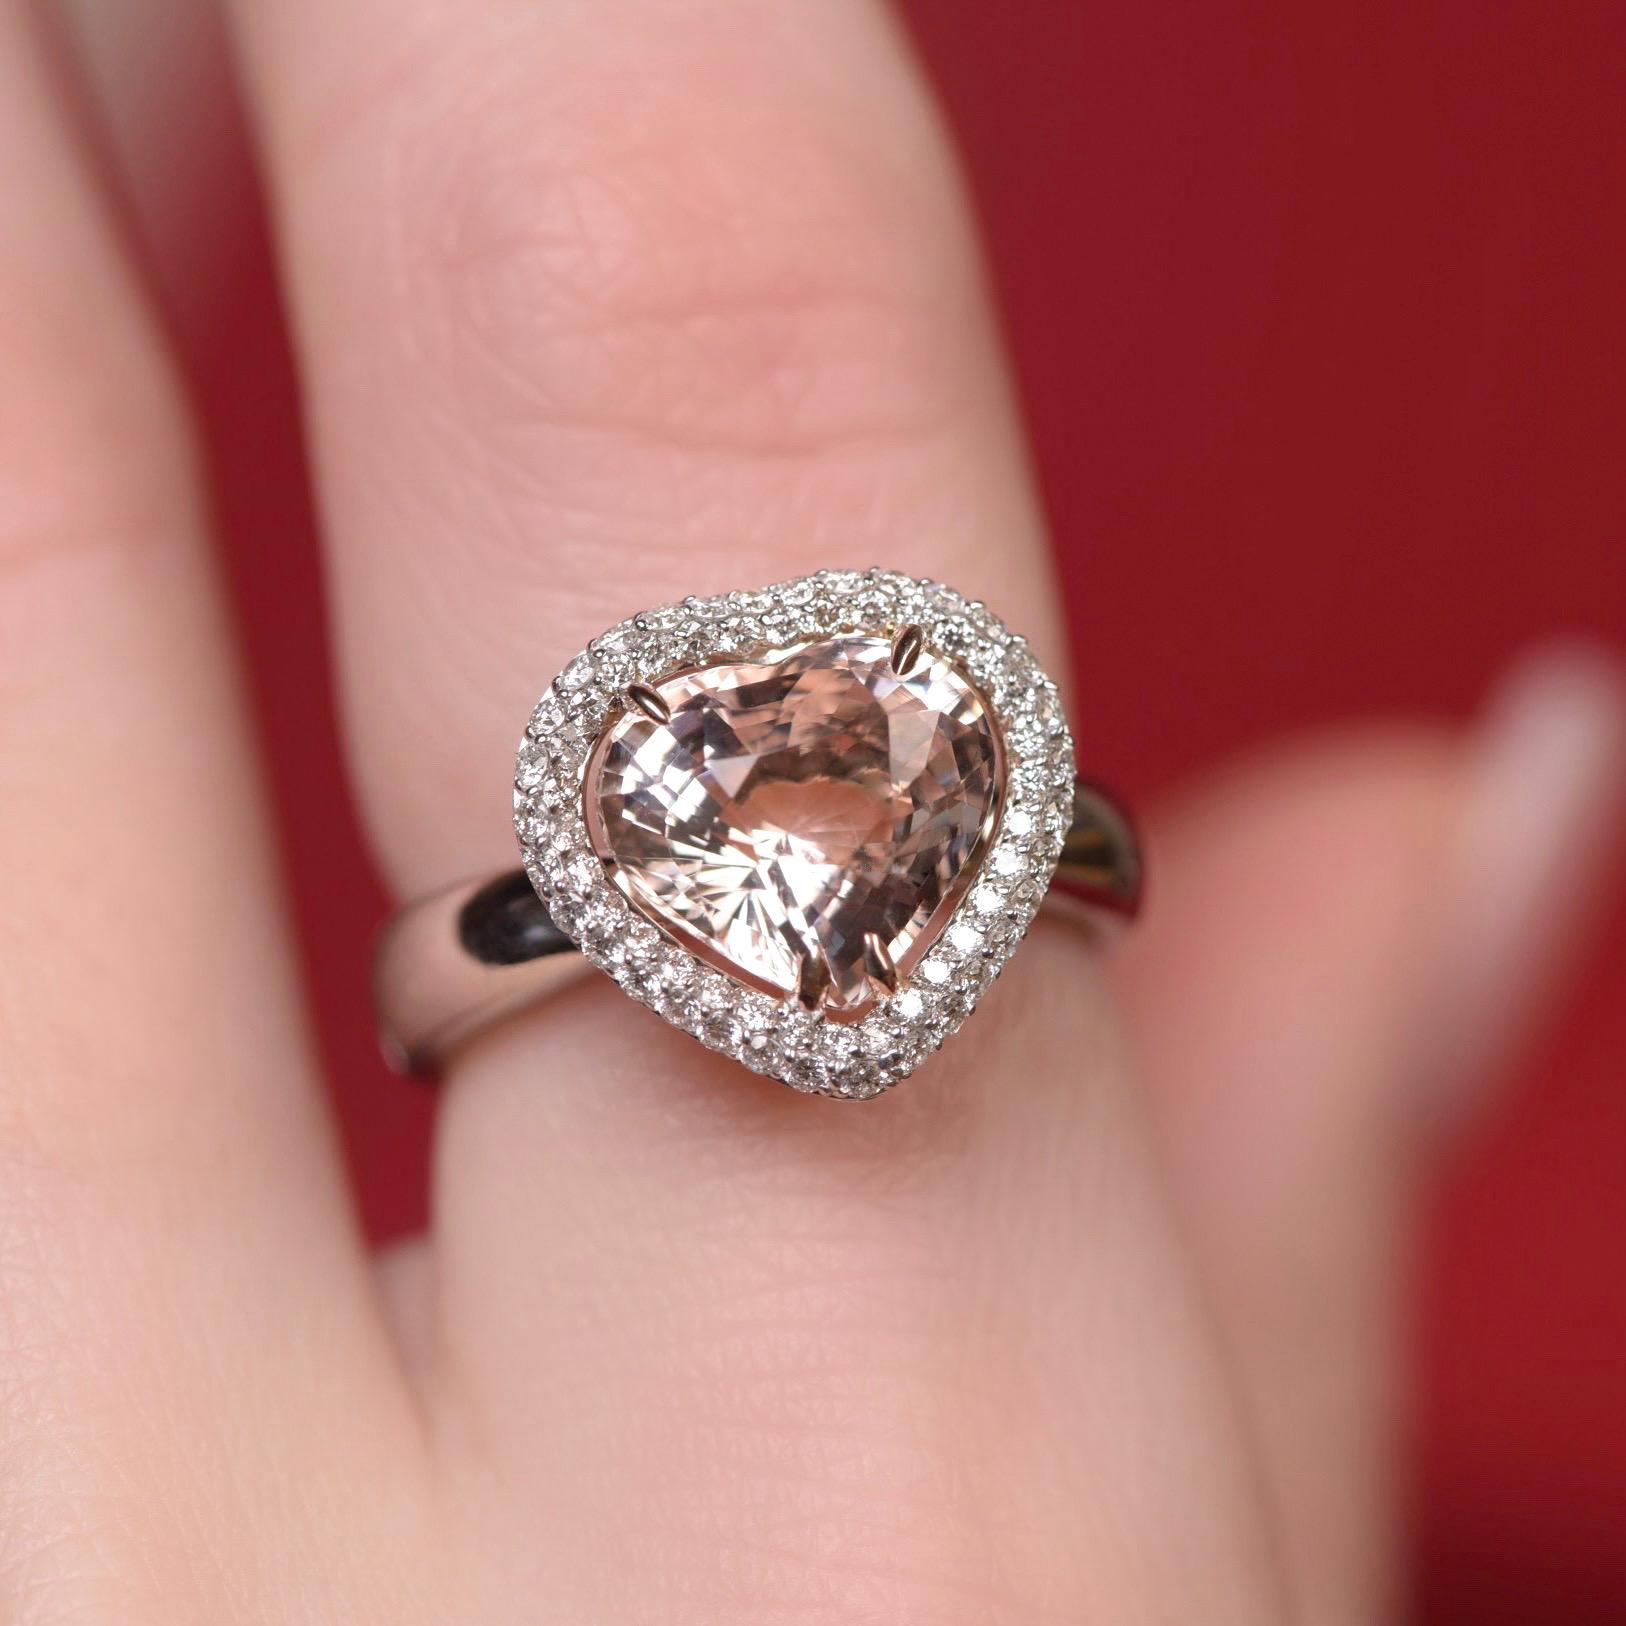 We love to work with natural pink stones such as the morganite in this ring.
Heart shape makes the appearance of this morganite very romantic and delicate.
Its peach pink hue looks gorgeous in a diamonds pave frame. 
We decided to make this ring in